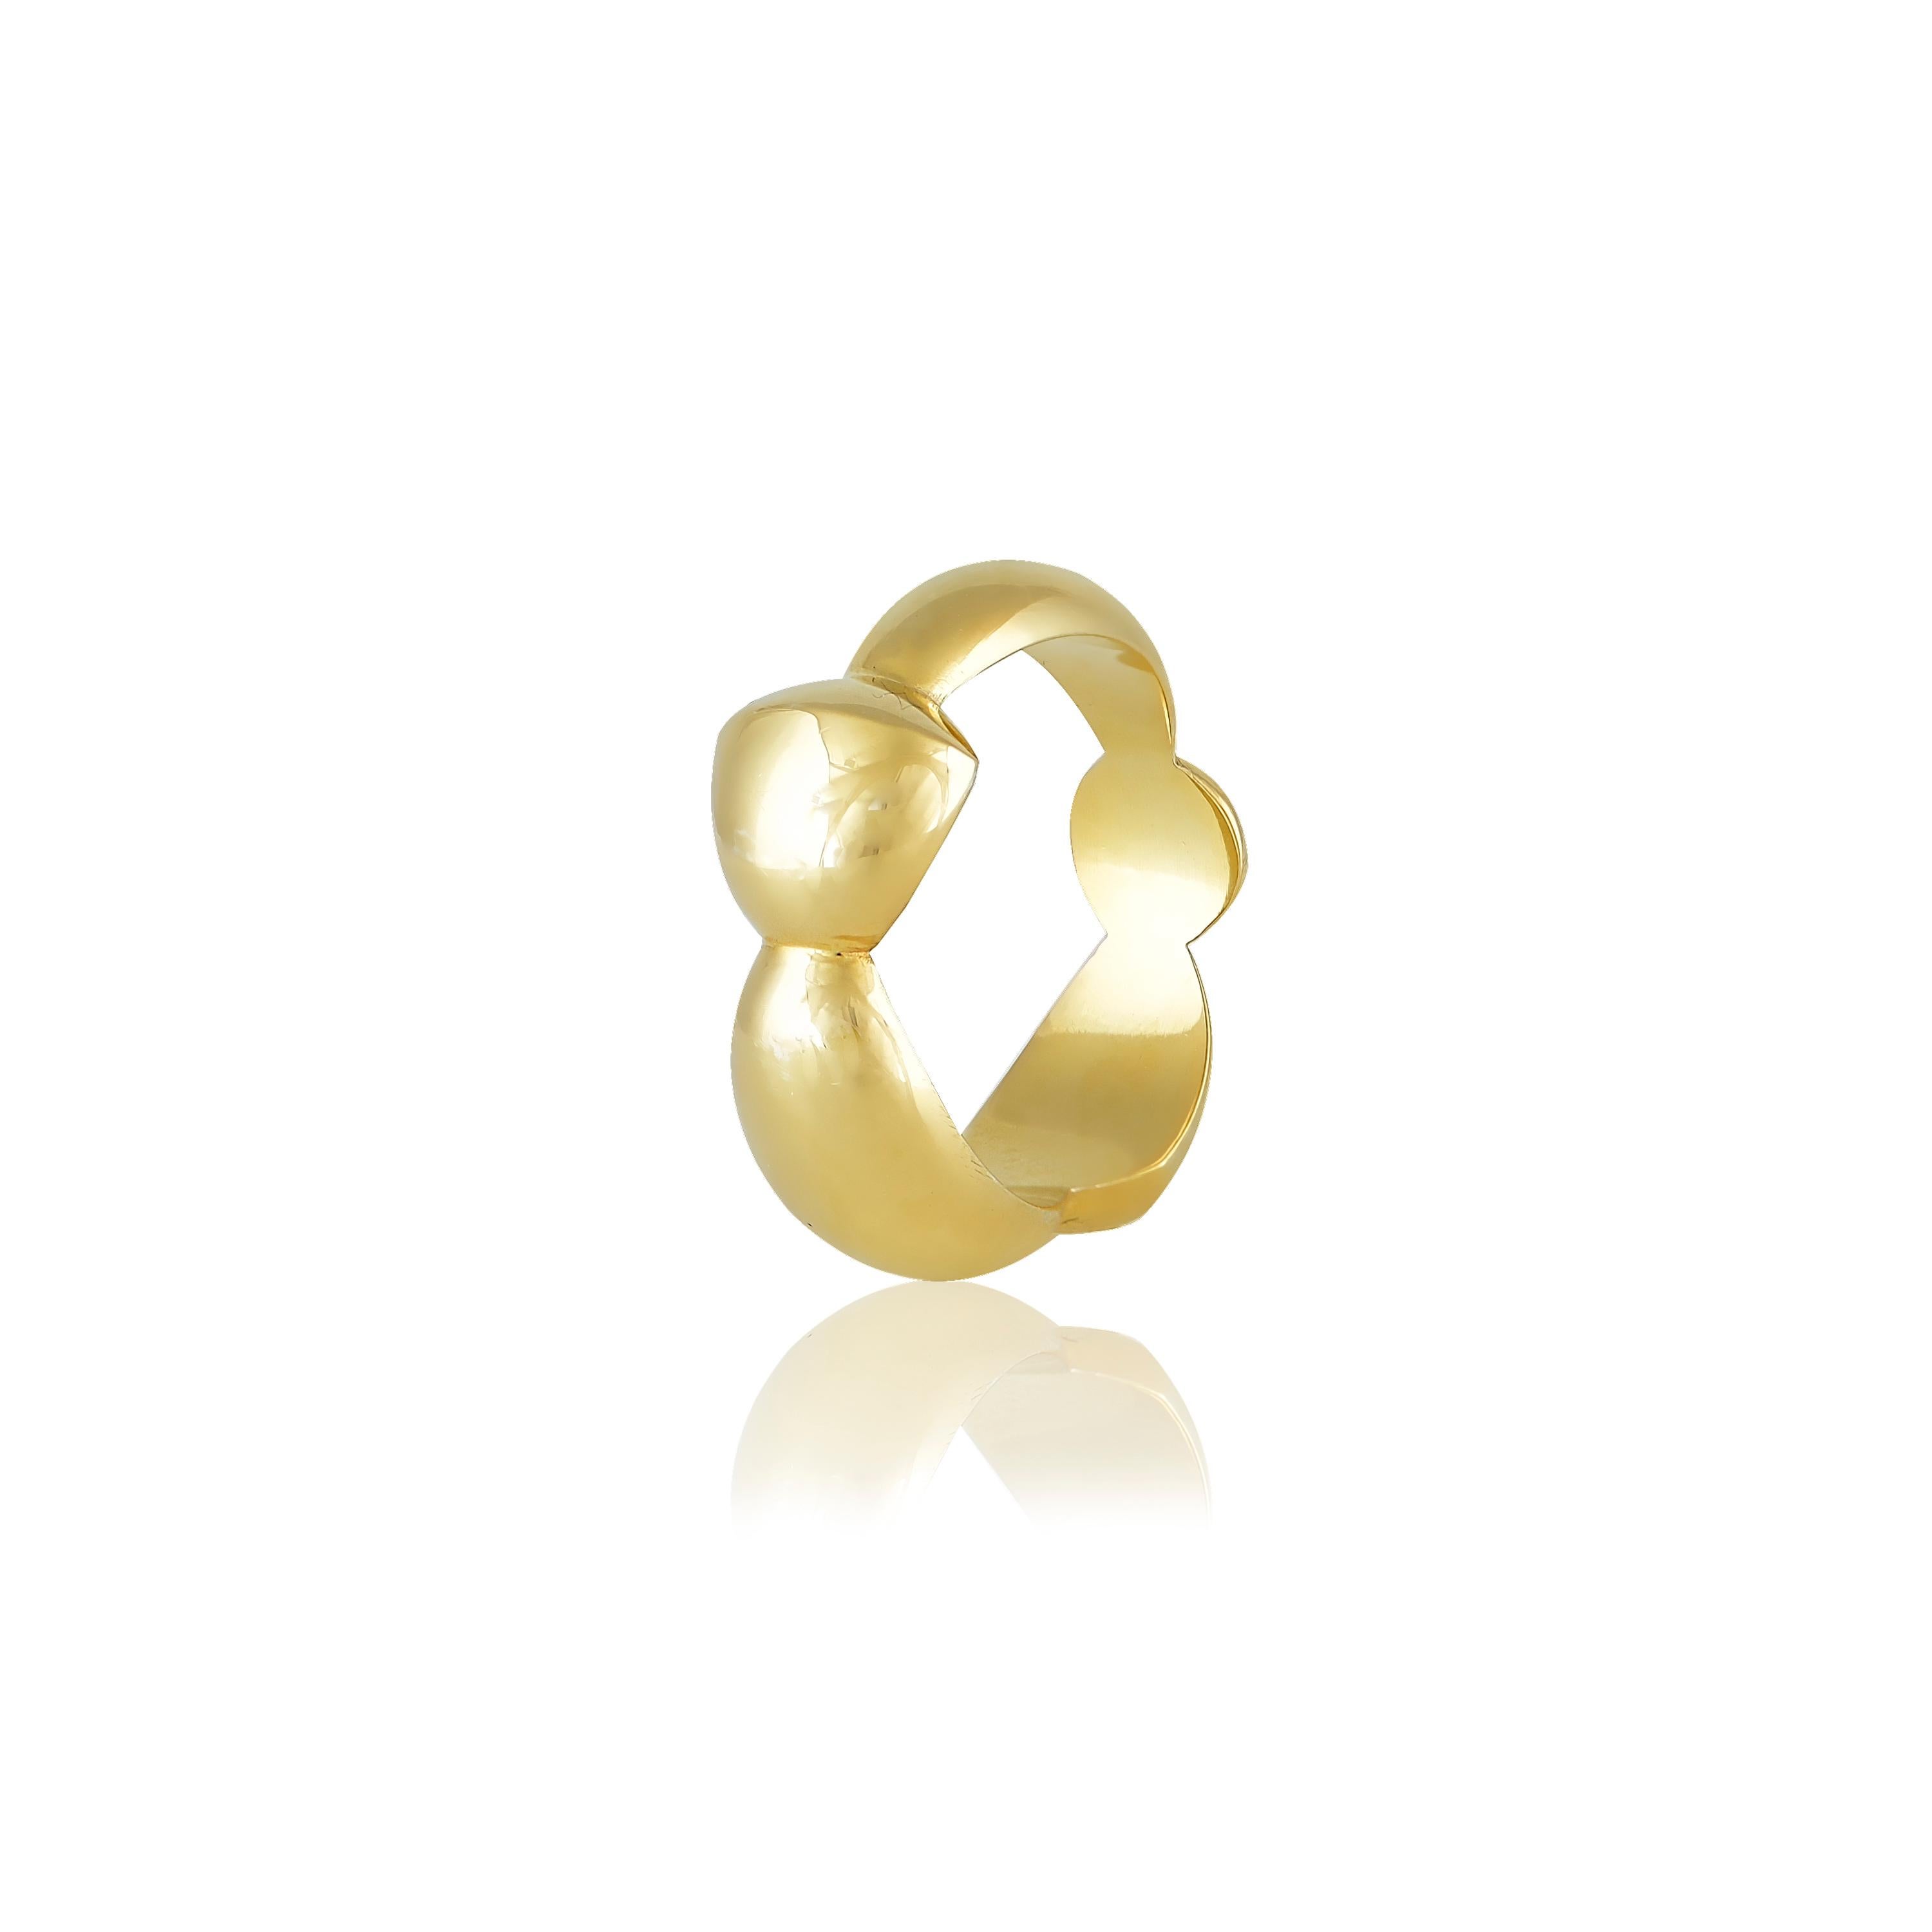 Designer: Alexia Gryllaki

Dimensions: motif 10mm
Ring Size UK M 1/2, US 6 1/2
Weight: approximately 10.1g  (inc. chain)
Barcode: NEX3005


Totem ring in 18 karat yellow gold, that can be transformed into a pendant, by hanging it through a gold